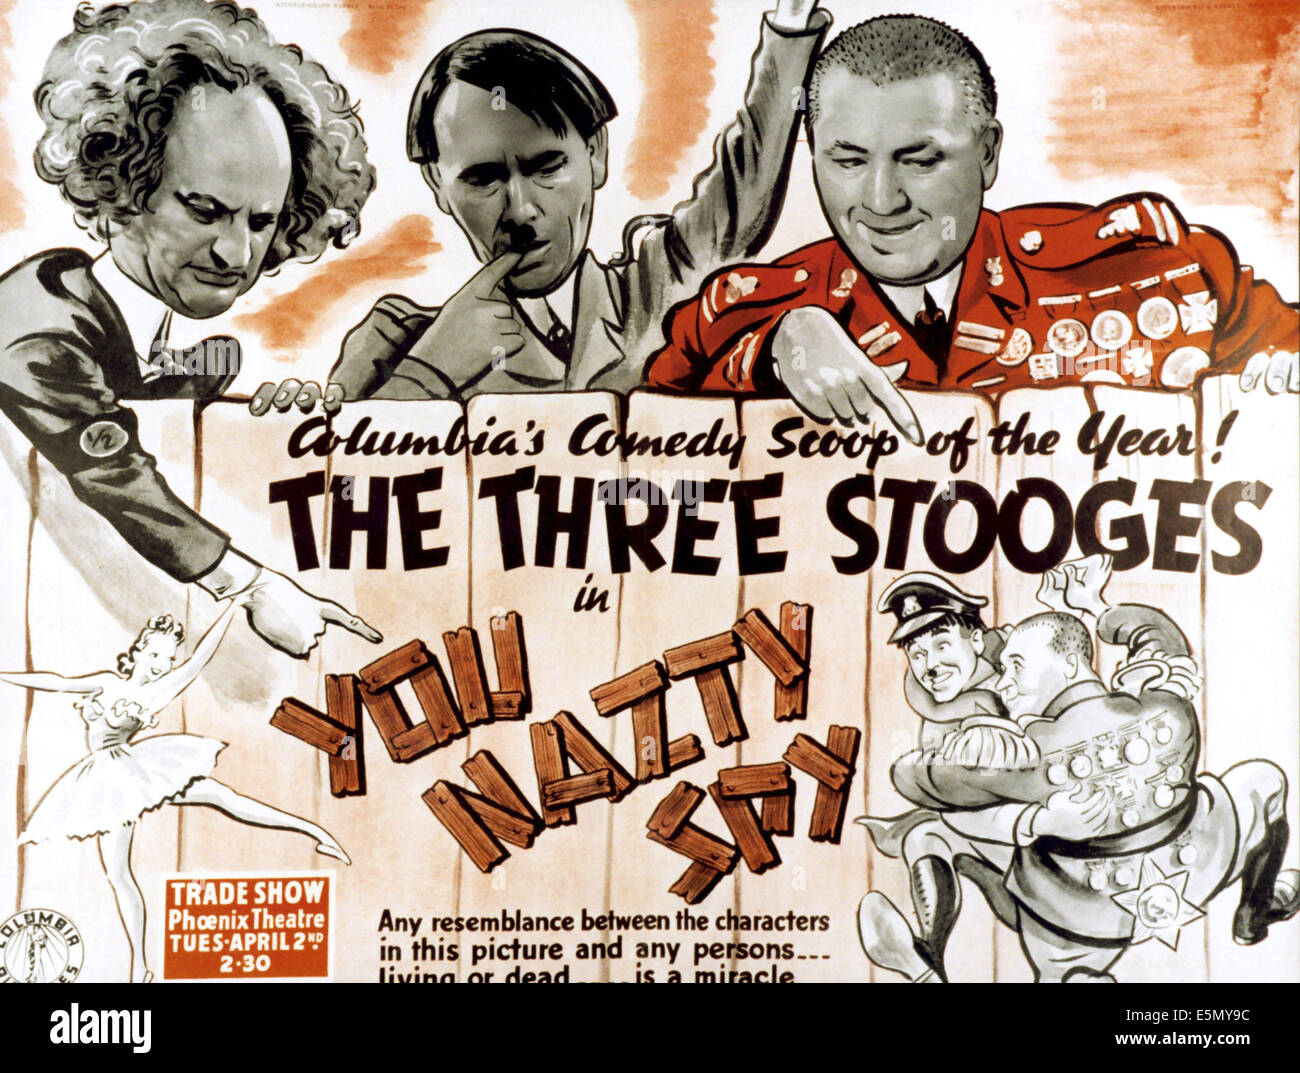 YOU NAZTY SPY, from left: Larry Fine, Moe Howard, Curly Howard (The Three Stooges), 1940 Stock Photo